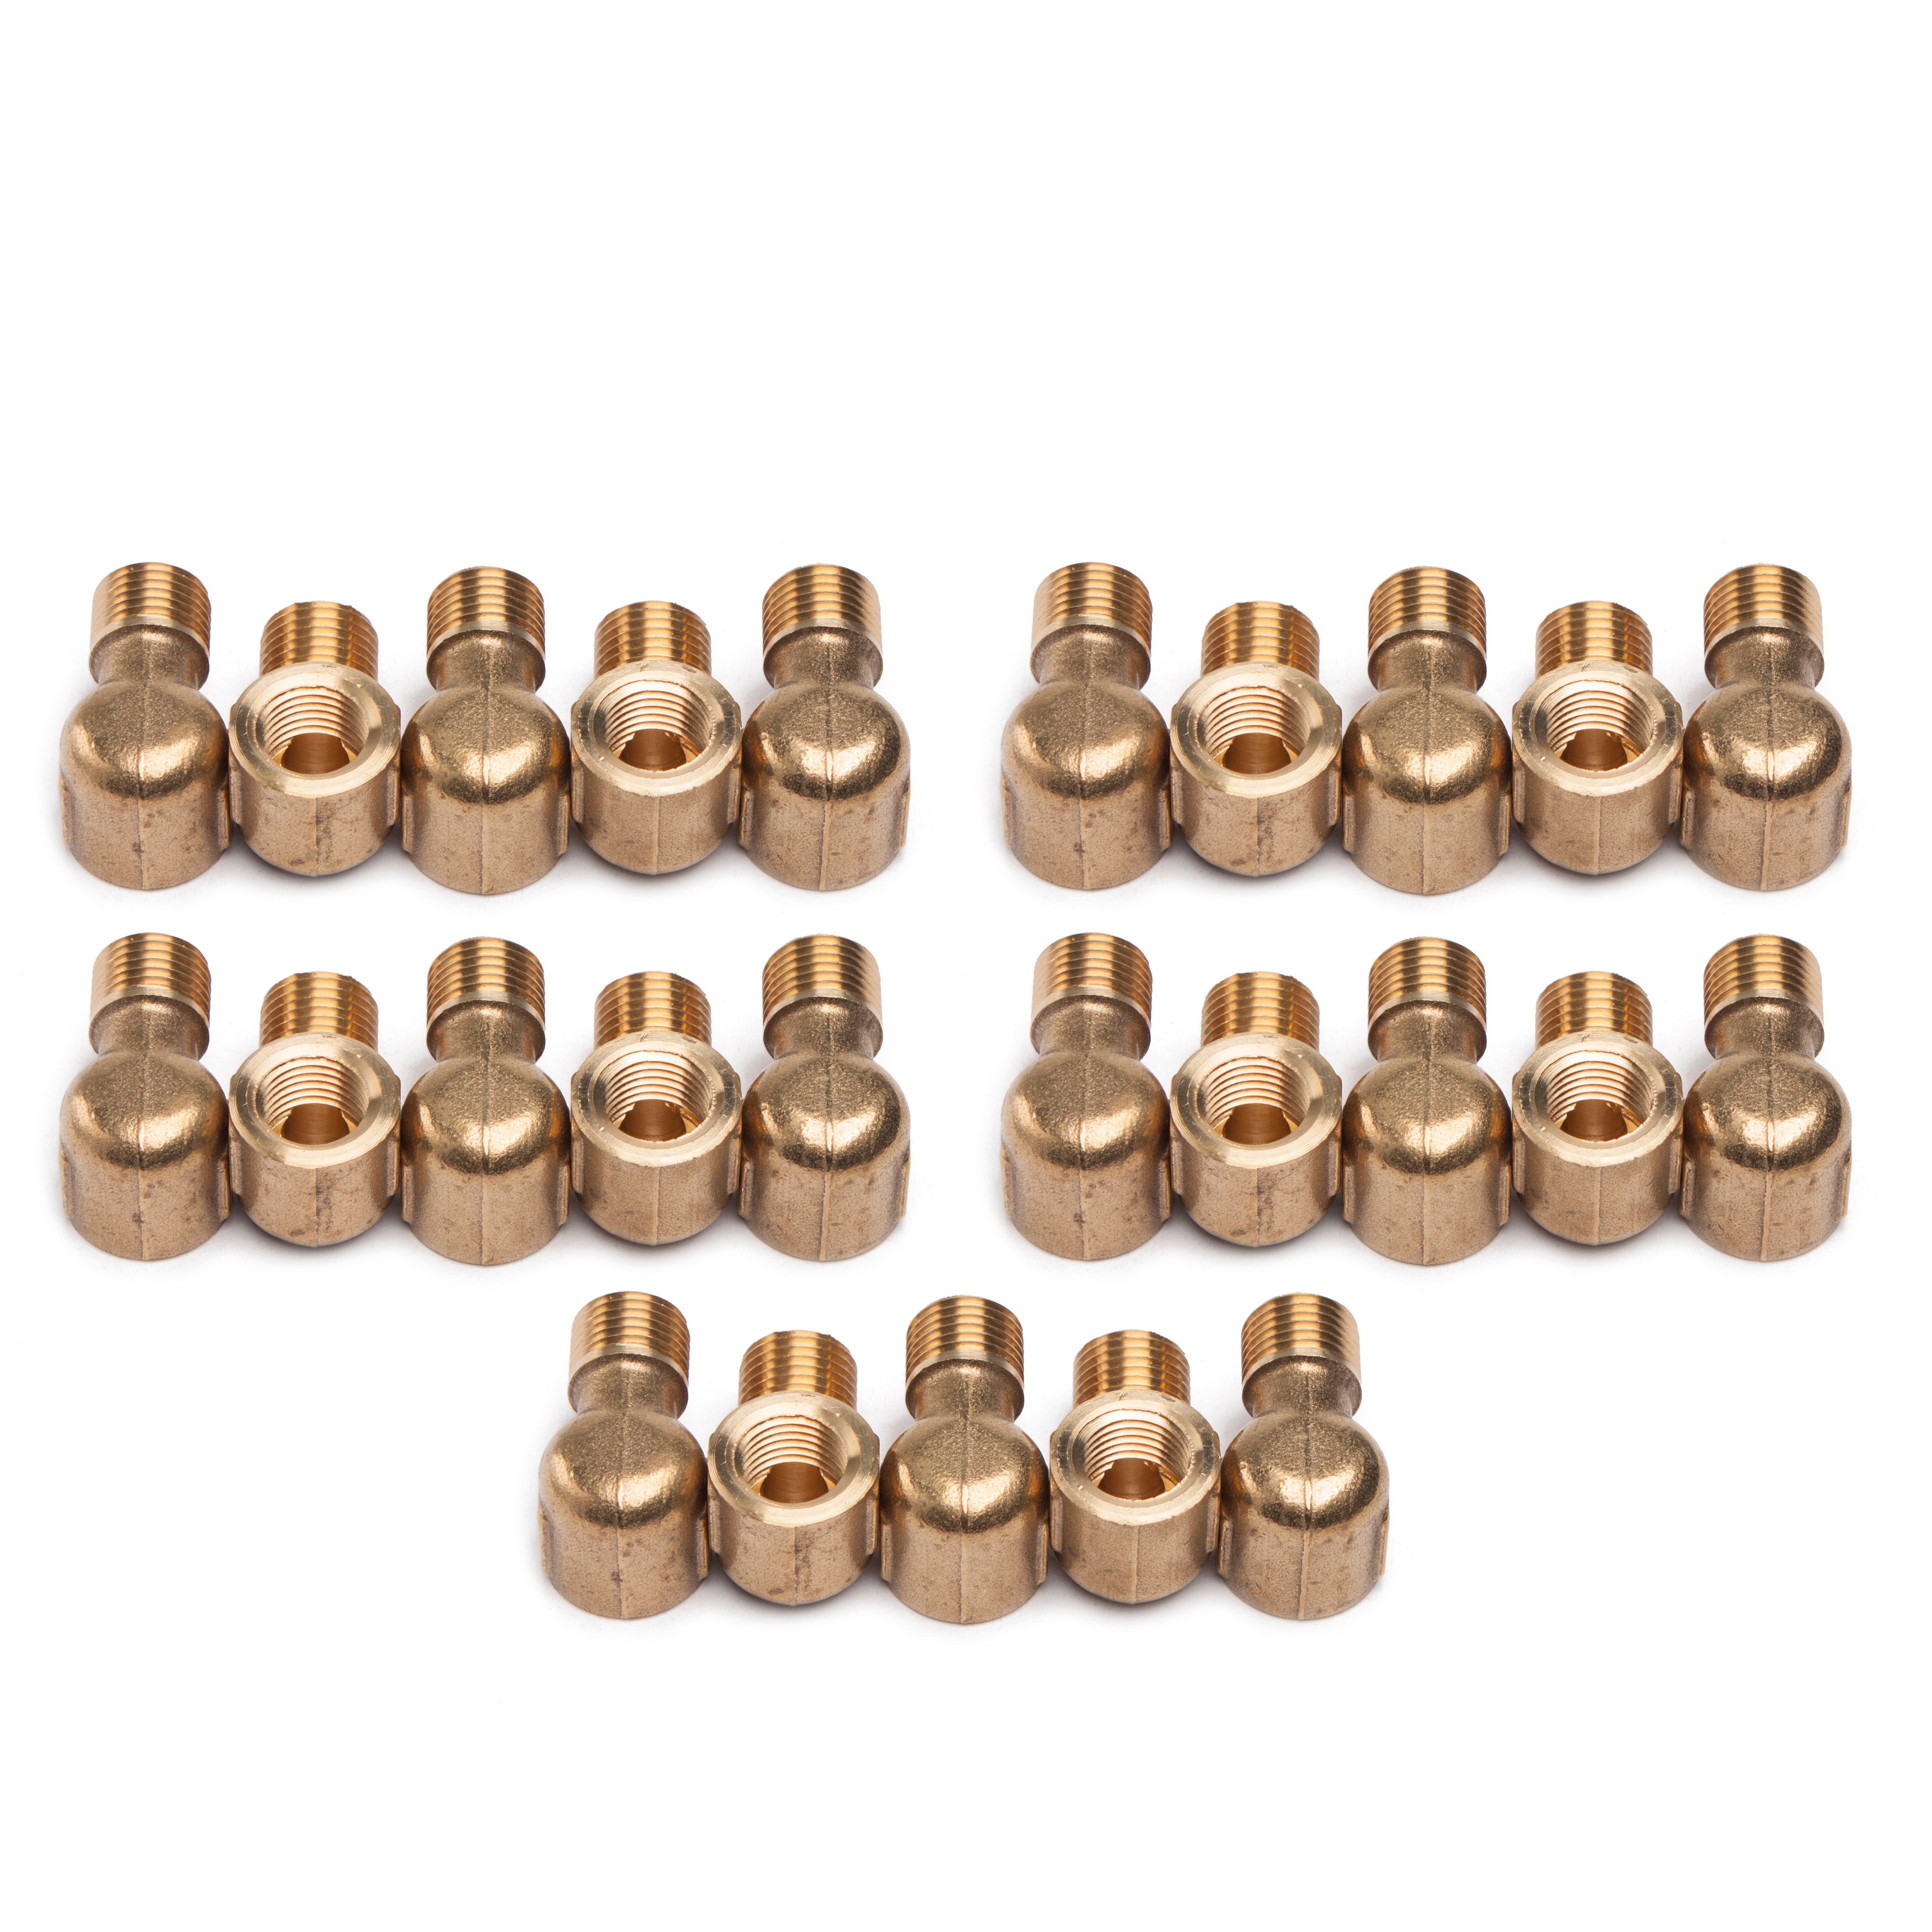 LTWFITTING Brass BSP Pipe 90 Deg 1/4-Inch BSPP Street Elbow Forged Fitting Fuel Air Boat (Pack of 25)